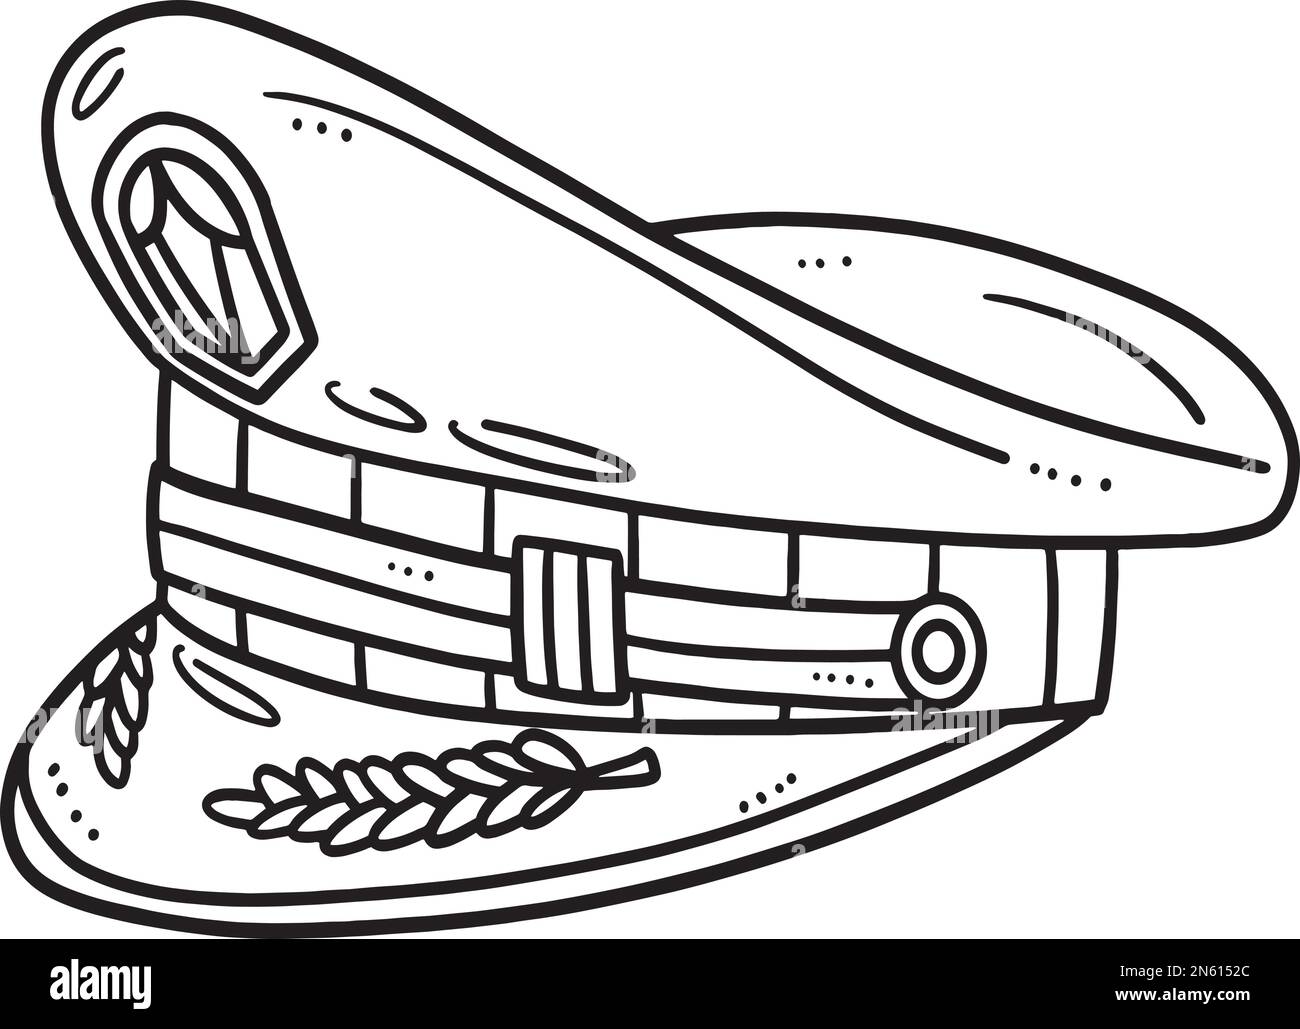 Military Cap Isolated Coloring Page for Kids Stock Vector